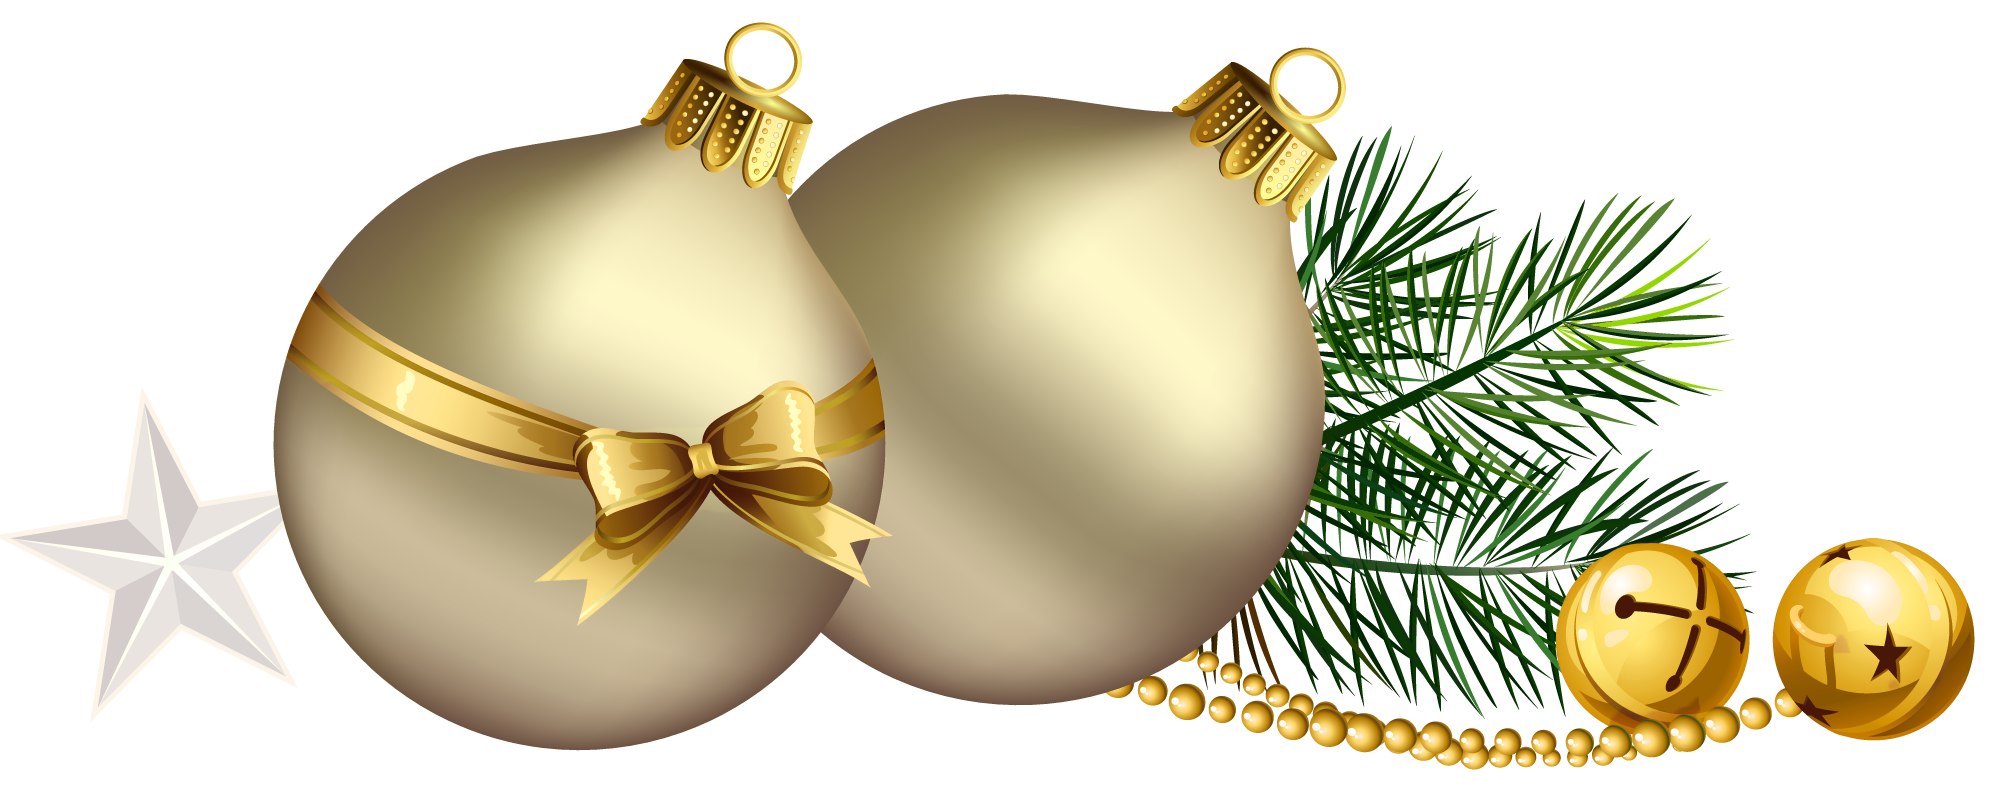 Download PNG image - Gold Christmas Bauble PNG Background Image 